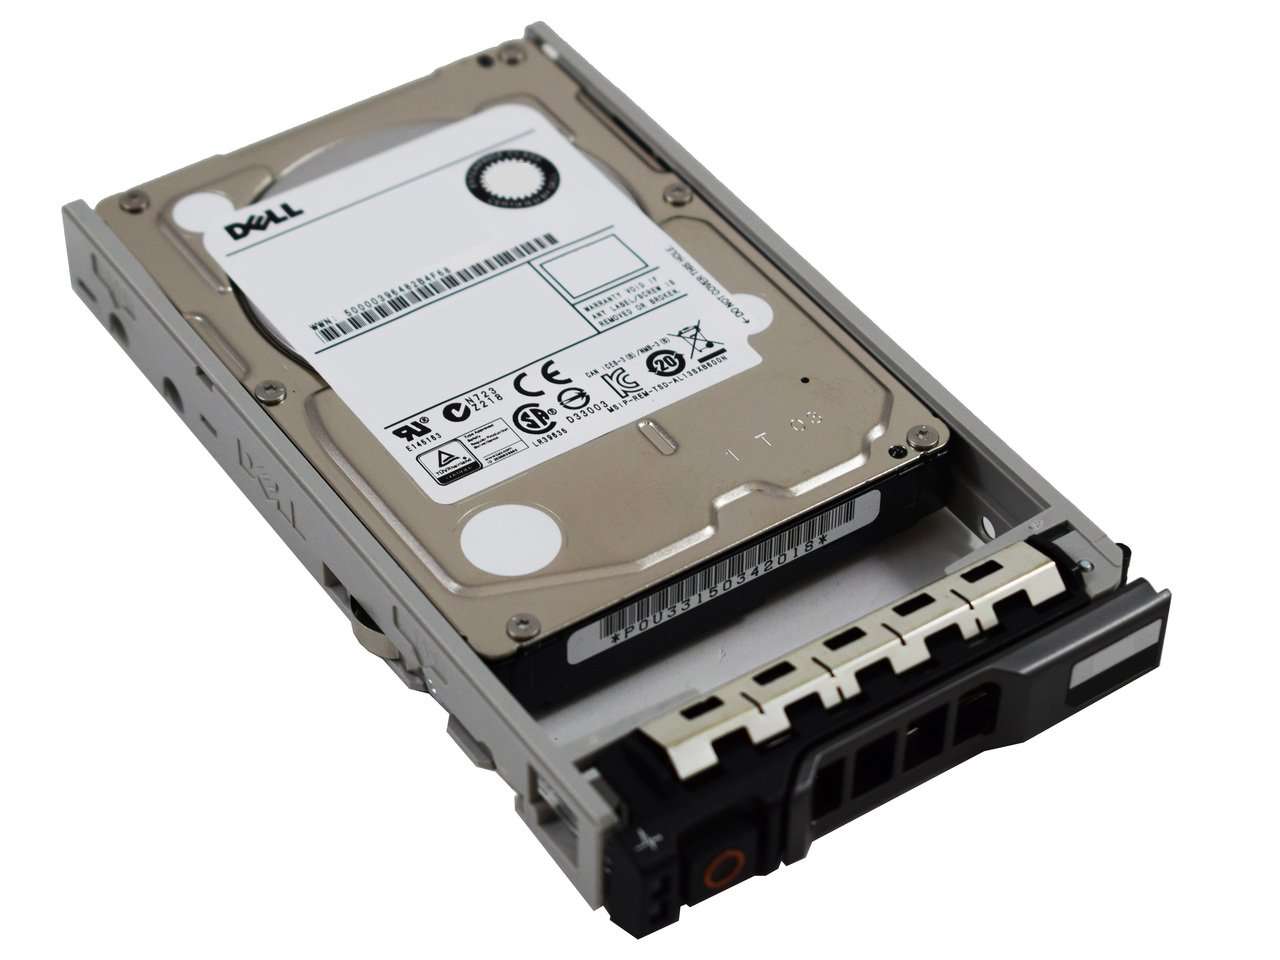 Dell G13 400-AHWL 600GB 15K RPM SAS 6Gb/s 512n 2.5" Manufacturer Recertified HDD